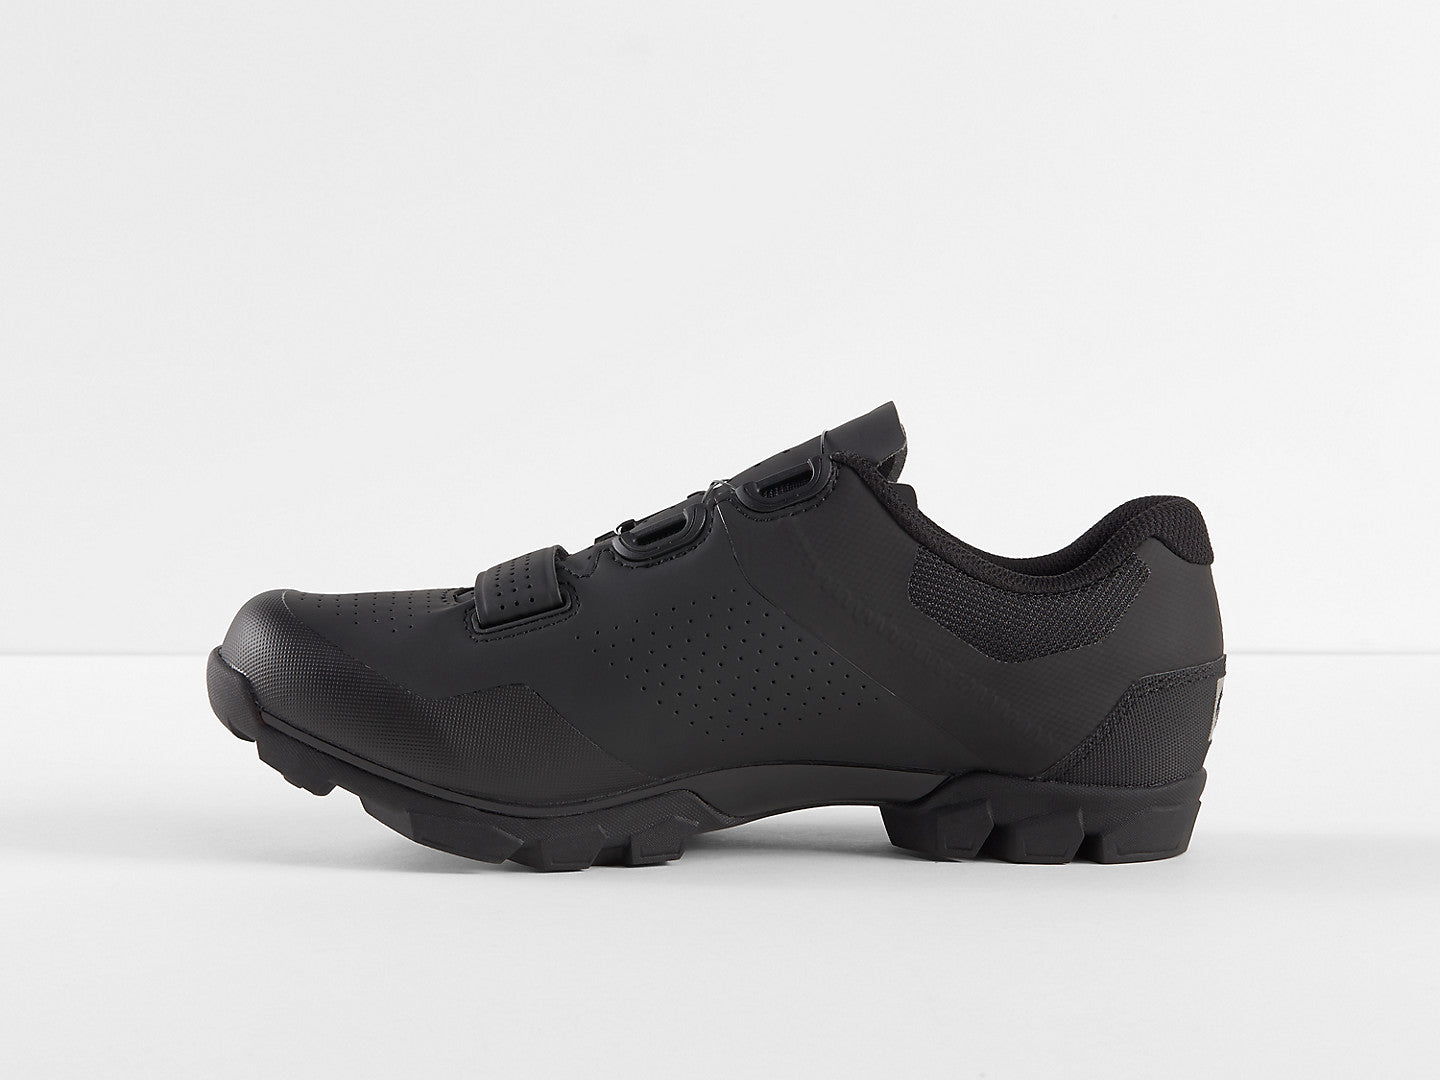 BONTRAGER - FORAY MOUNTAIN BIKE SHOE (SAVE 50% NOW! ENTER CODE BONTRAGER50 AT CHECK OUT)